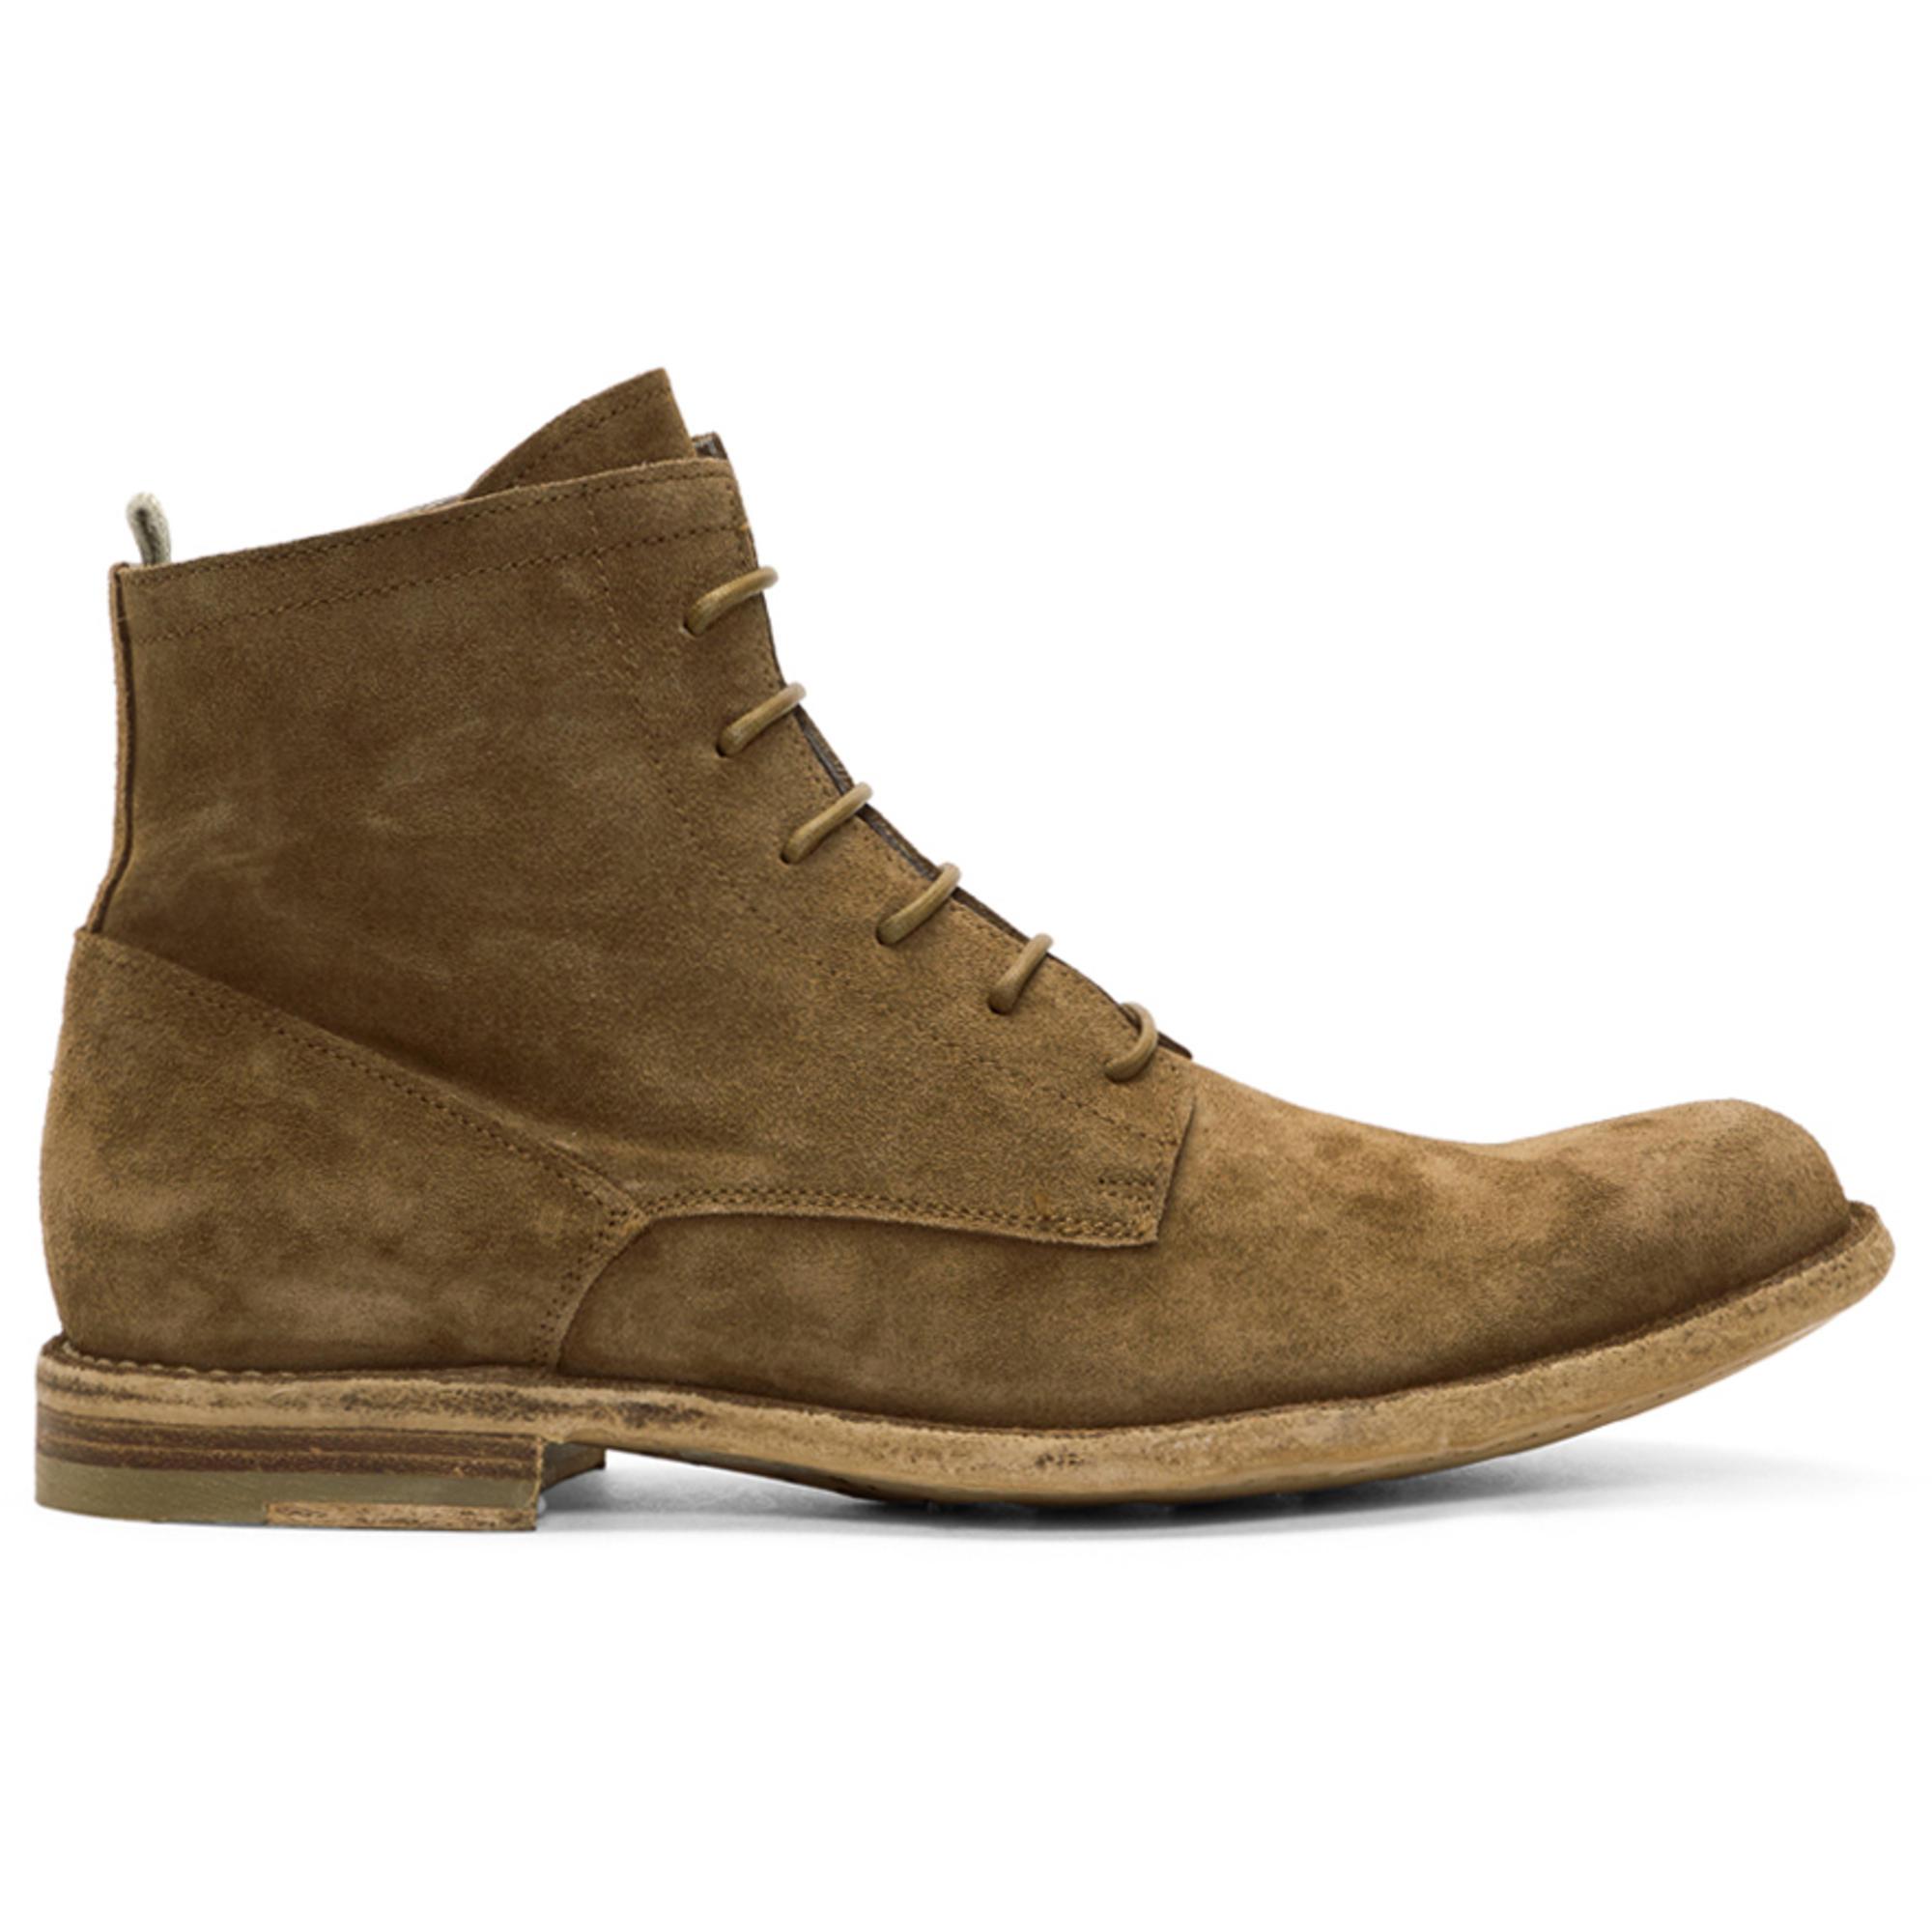 Lyst - Officine Creative Tan Suede Ideal 19 Boots in Brown for Men